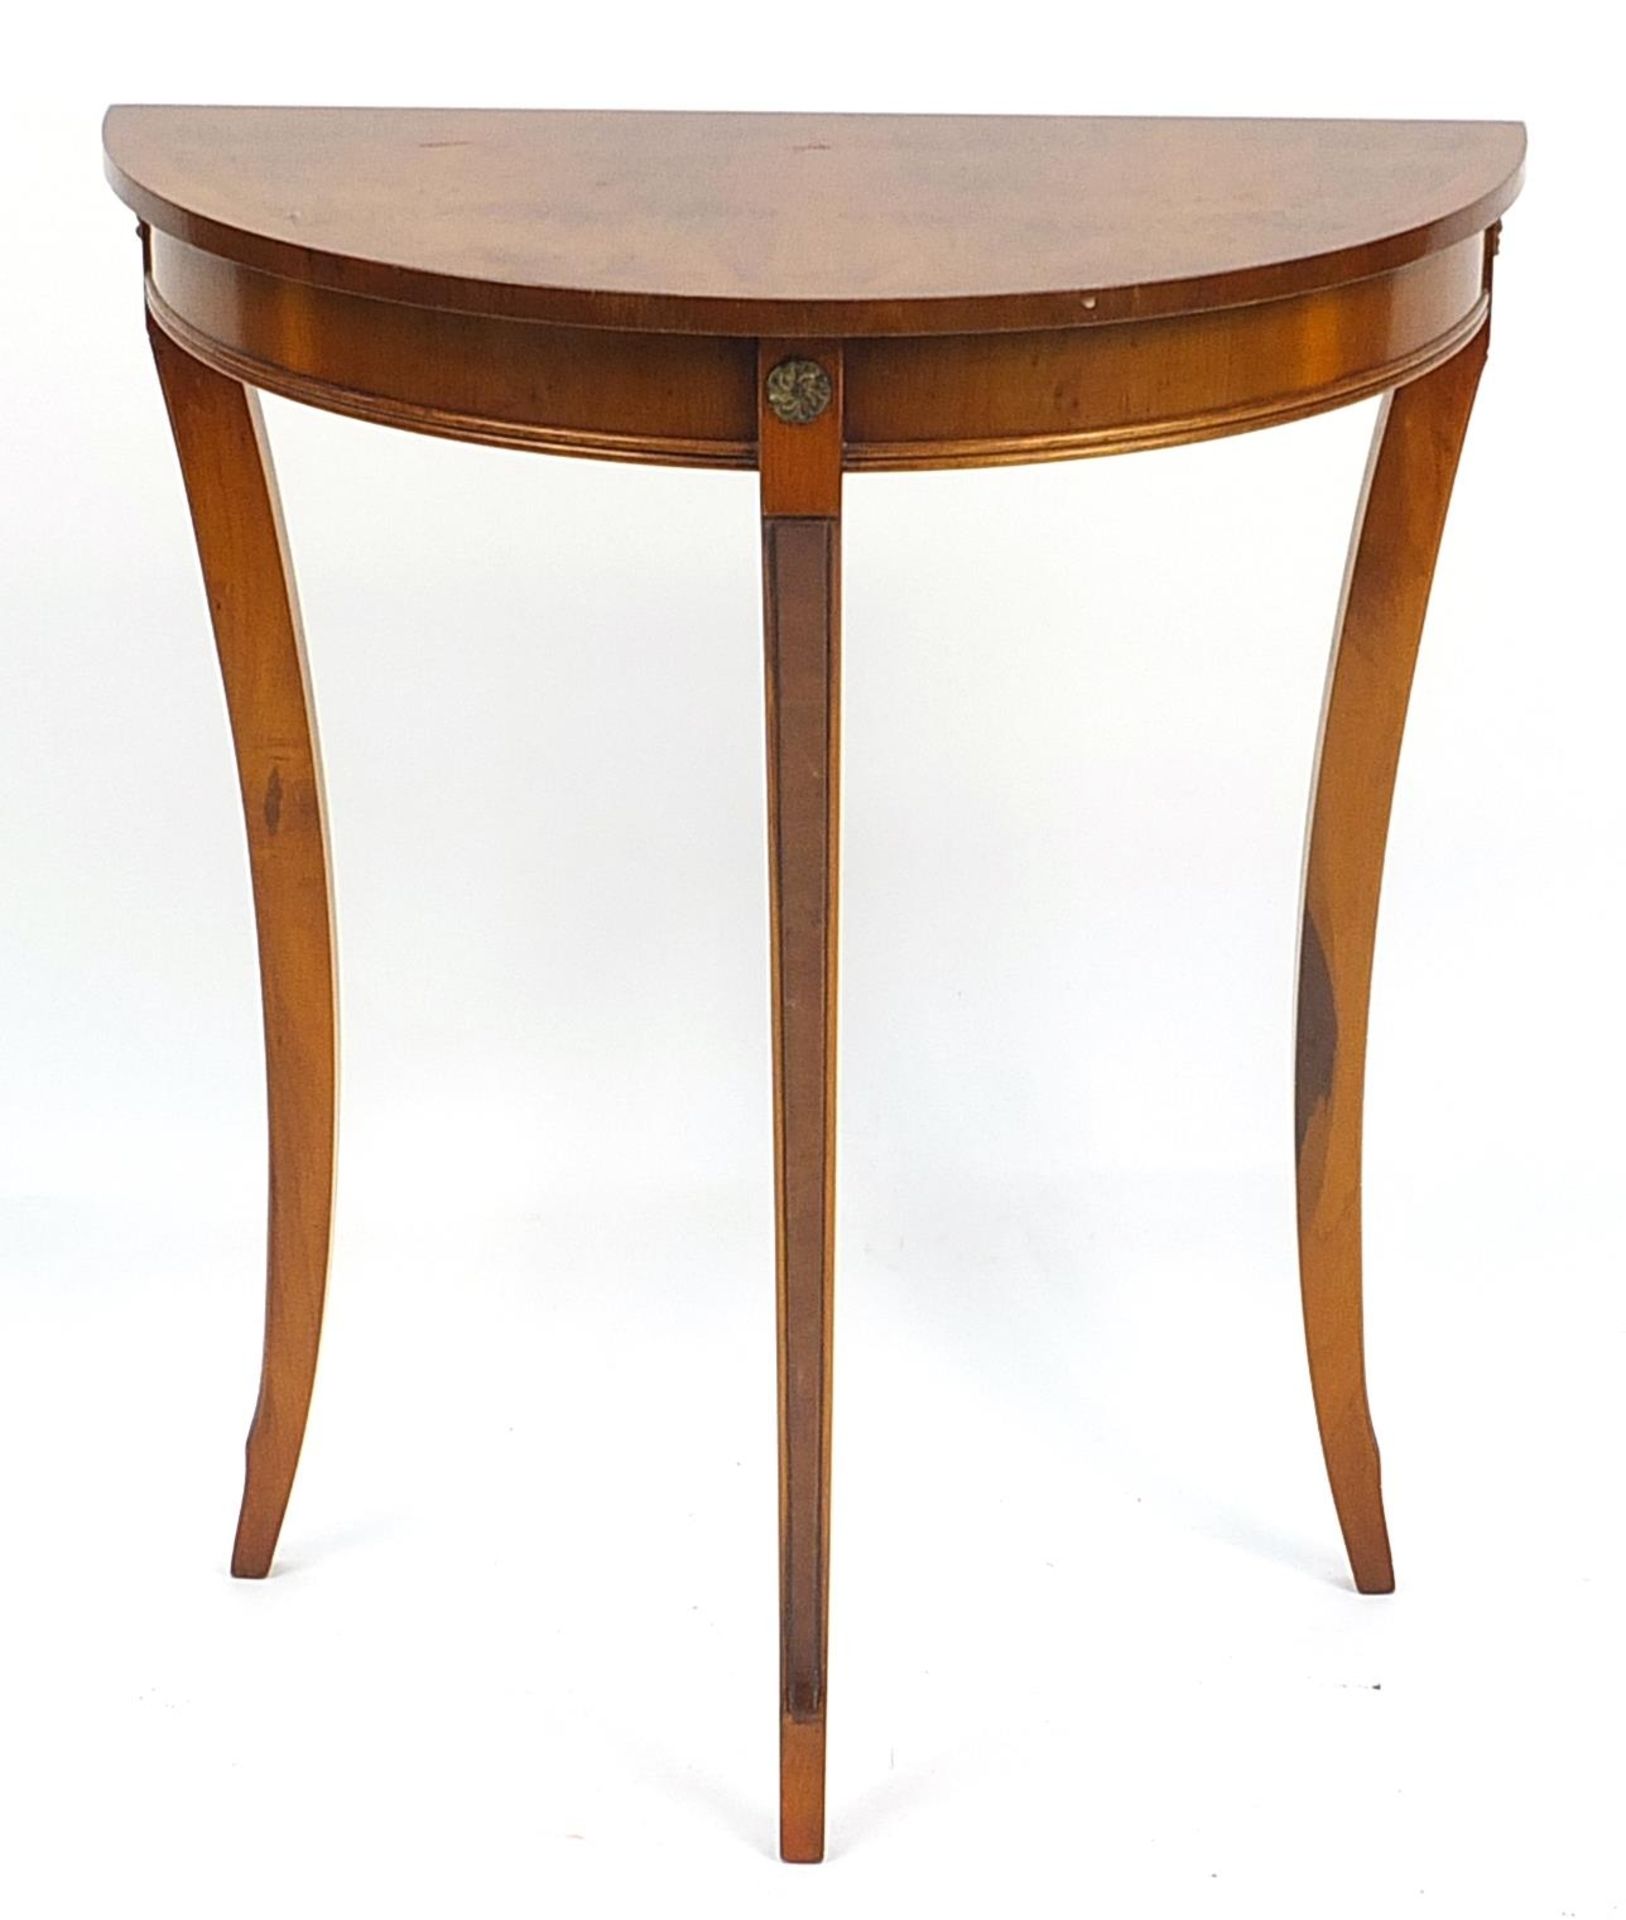 Yew demi lune side table, 70cm H x 61cm W x 30cm D - Image 2 of 4